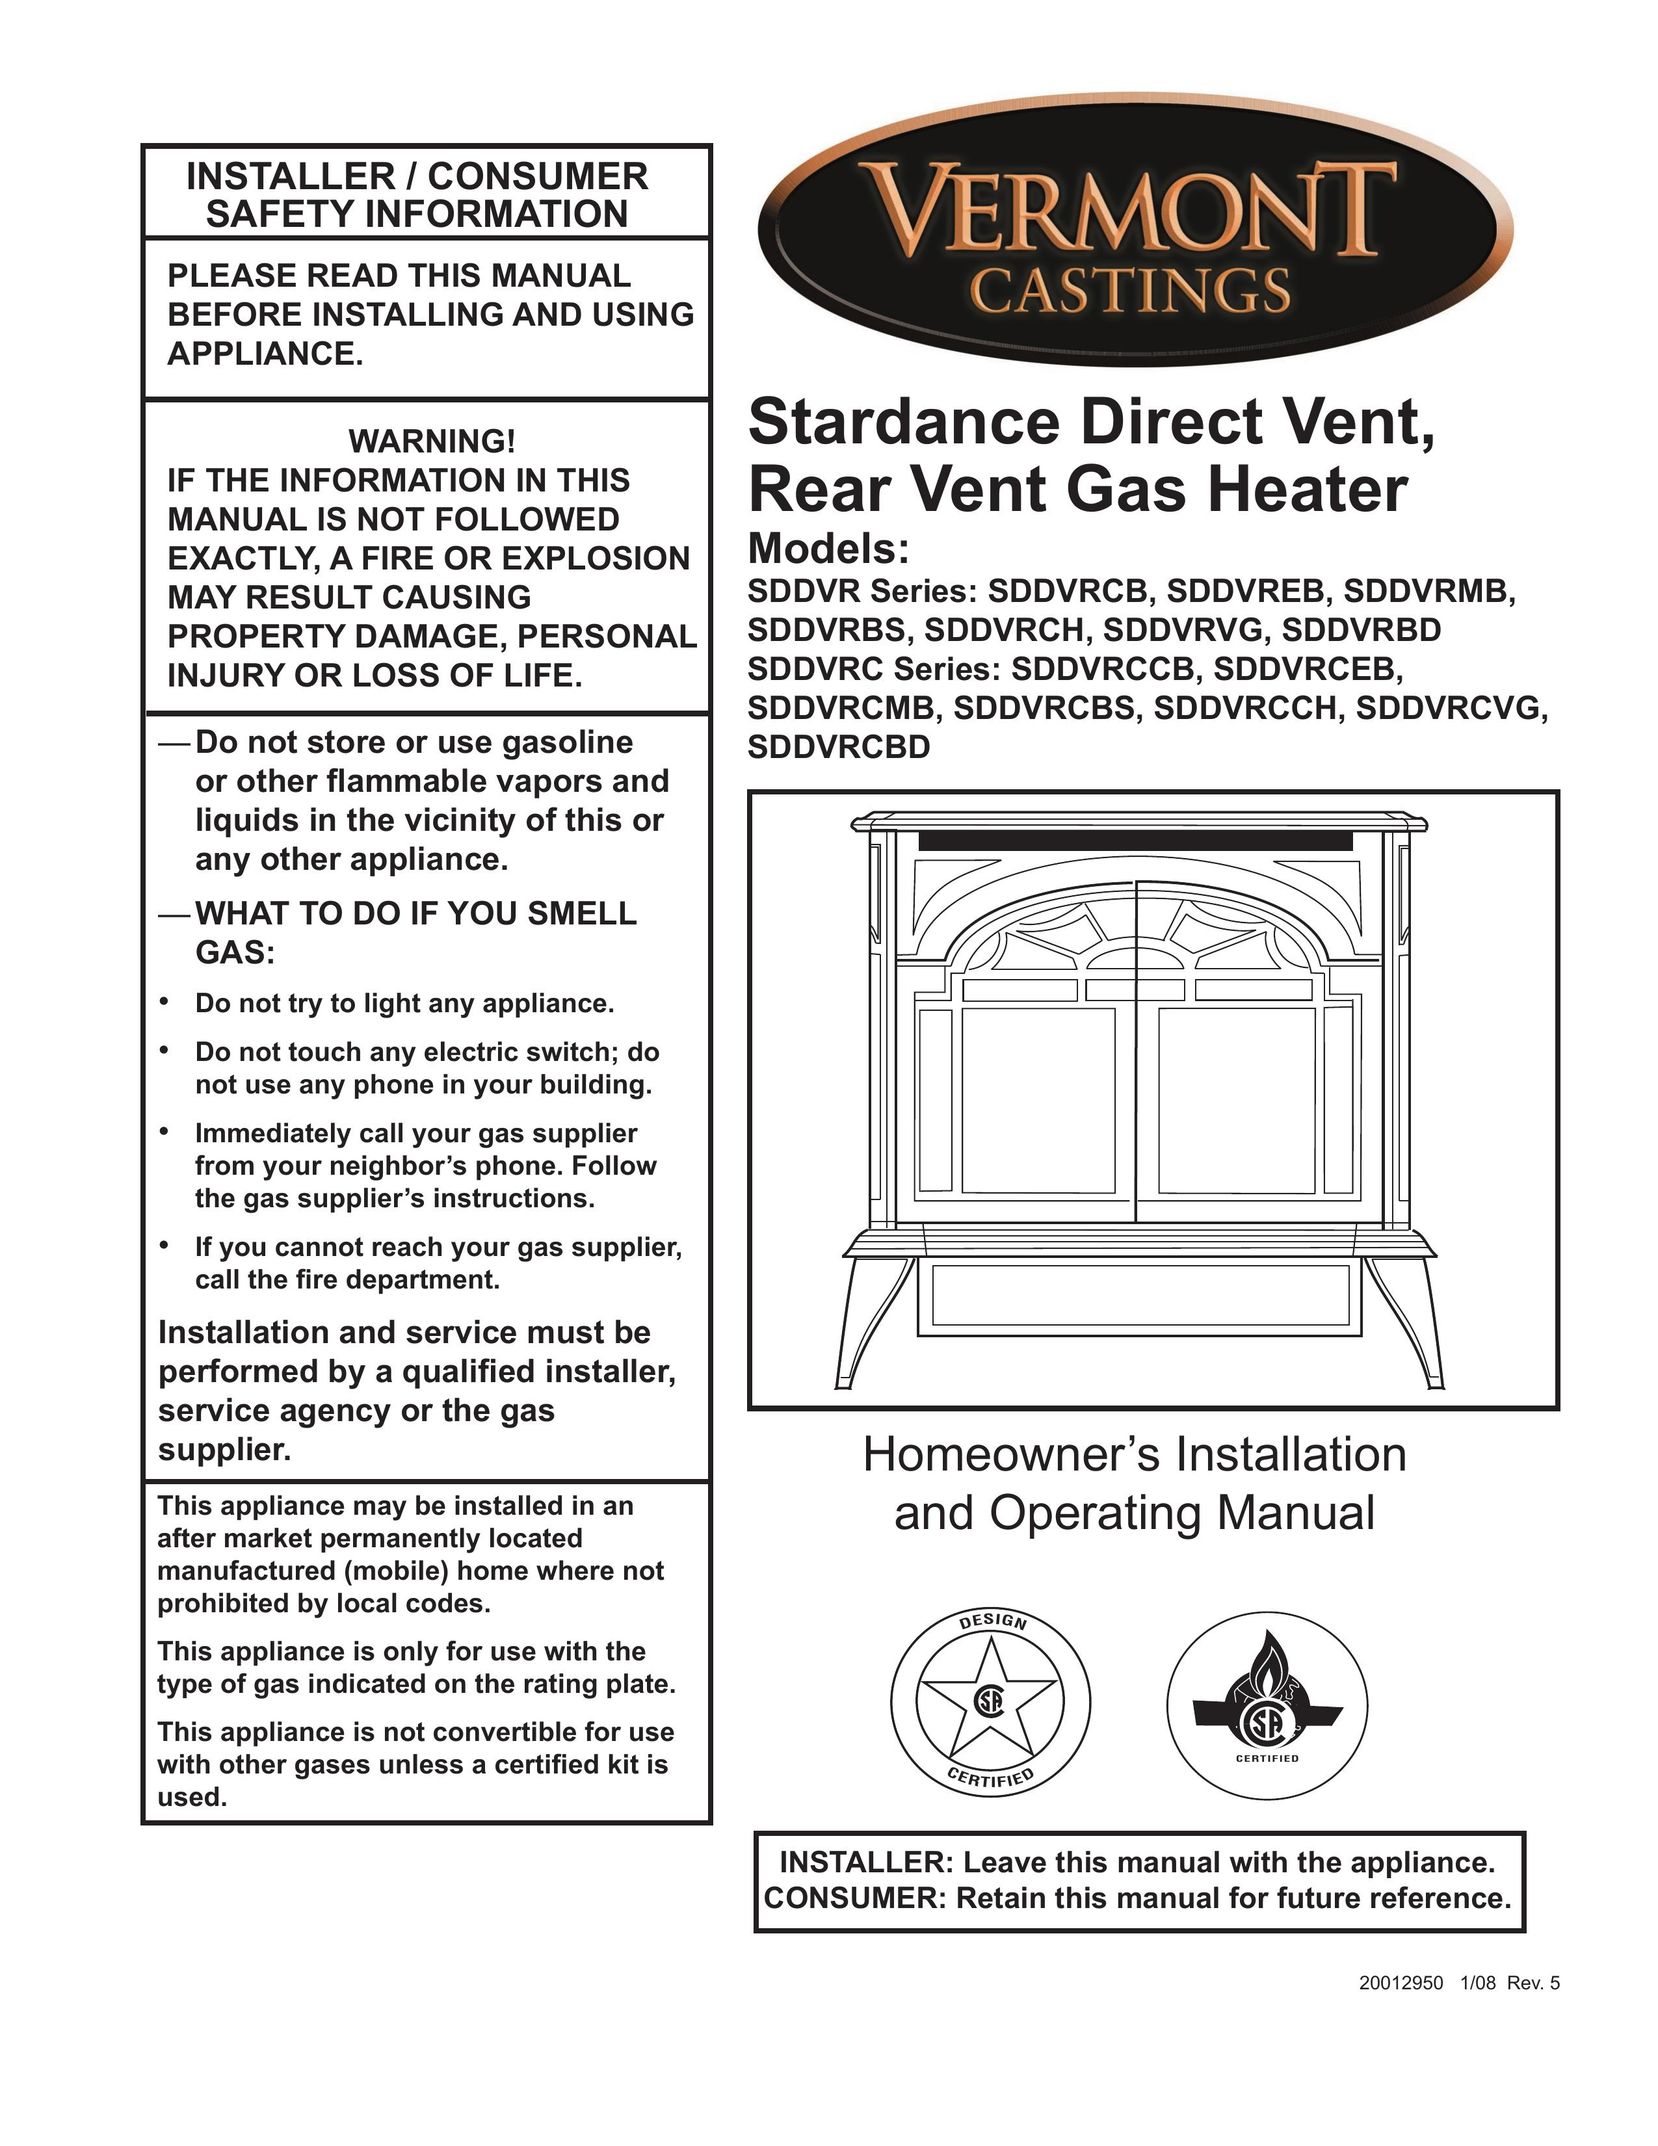 Vermont Casting SDDVRCH Gas Heater User Manual